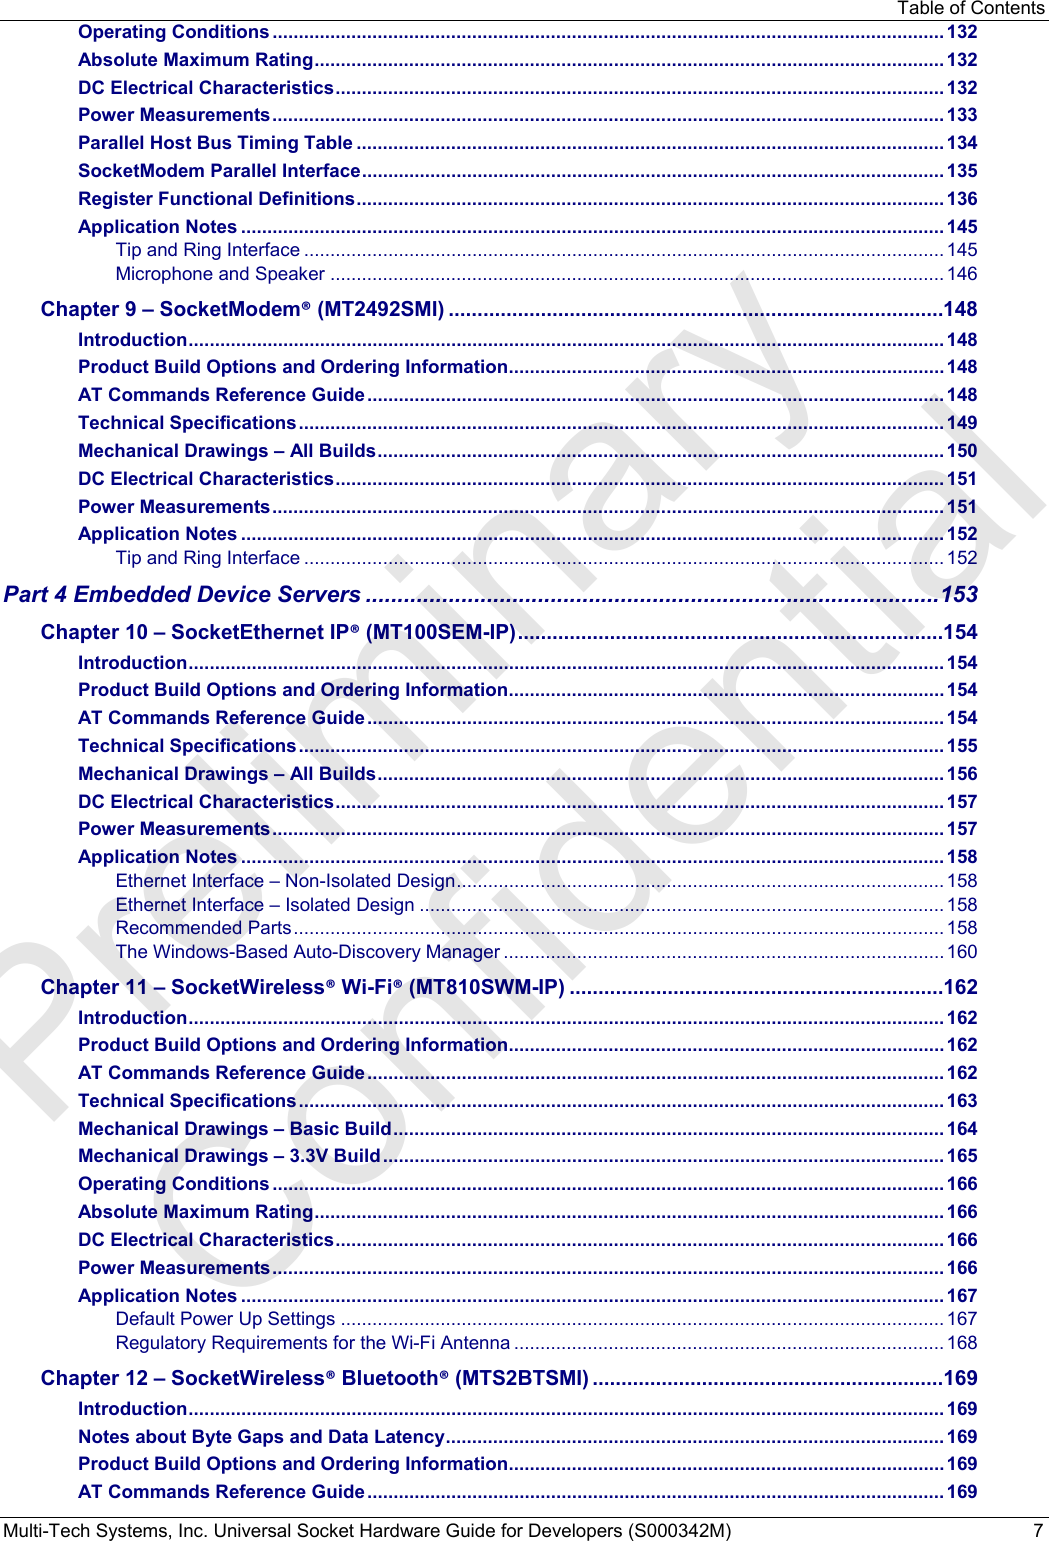 Table of Contents Multi-Tech Systems, Inc. Universal Socket Hardware Guide for Developers (S000342M)  7 Operating Conditions ................................................................................................................................ 132 Absolute Maximum Rating ........................................................................................................................ 132 DC Electrical Characteristics .................................................................................................................... 132 Power Measurements ................................................................................................................................ 133 Parallel Host Bus Timing Table ................................................................................................................ 134 SocketModem Parallel Interface ............................................................................................................... 135 Register Functional Definitions ................................................................................................................ 136 Application Notes ...................................................................................................................................... 145 Tip and Ring Interface .......................................................................................................................... 145 Microphone and Speaker ..................................................................................................................... 146 Chapter 9 – SocketModem® (MT2492SMI) ......................................................................................148 Introduction ................................................................................................................................................ 148 Product Build Options and Ordering Information ................................................................................... 148 AT Commands Reference Guide .............................................................................................................. 148 Technical Specifications ........................................................................................................................... 149 Mechanical Drawings – All Builds ............................................................................................................ 150 DC Electrical Characteristics .................................................................................................................... 151 Power Measurements ................................................................................................................................ 151 Application Notes ...................................................................................................................................... 152 Tip and Ring Interface .......................................................................................................................... 152 Part 4 Embedded Device Servers .......................................................................................... 153 Chapter 10 – SocketEthernet IP® (MT100SEM-IP) ..........................................................................154 Introduction ................................................................................................................................................ 154 Product Build Options and Ordering Information ................................................................................... 154 AT Commands Reference Guide .............................................................................................................. 154 Technical Specifications ........................................................................................................................... 155 Mechanical Drawings – All Builds ............................................................................................................ 156 DC Electrical Characteristics .................................................................................................................... 157 Power Measurements ................................................................................................................................ 157 Application Notes ...................................................................................................................................... 158 Ethernet Interface – Non-Isolated Design ............................................................................................. 158 Ethernet Interface – Isolated Design .................................................................................................... 158 Recommended Parts ............................................................................................................................ 158 The Windows-Based Auto-Discovery Manager .................................................................................... 160 Chapter 11 – SocketWireless® Wi-Fi® (MT810SWM-IP) .................................................................162 Introduction ................................................................................................................................................ 162 Product Build Options and Ordering Information ................................................................................... 162 AT Commands Reference Guide .............................................................................................................. 162 Technical Specifications ........................................................................................................................... 163 Mechanical Drawings – Basic Build ......................................................................................................... 164 Mechanical Drawings – 3.3V Build ........................................................................................................... 165 Operating Conditions ................................................................................................................................ 166 Absolute Maximum Rating ........................................................................................................................ 166 DC Electrical Characteristics .................................................................................................................... 166 Power Measurements ................................................................................................................................ 166 Application Notes ...................................................................................................................................... 167 Default Power Up Settings ................................................................................................................... 167 Regulatory Requirements for the Wi-Fi Antenna .................................................................................. 168 Chapter 12 – SocketWireless® Bluetooth® (MTS2BTSMI) .............................................................169 Introduction ................................................................................................................................................ 169 Notes about Byte Gaps and Data Latency ............................................................................................... 169 Product Build Options and Ordering Information ................................................................................... 169 AT Commands Reference Guide .............................................................................................................. 169 Preliminary  Confidential